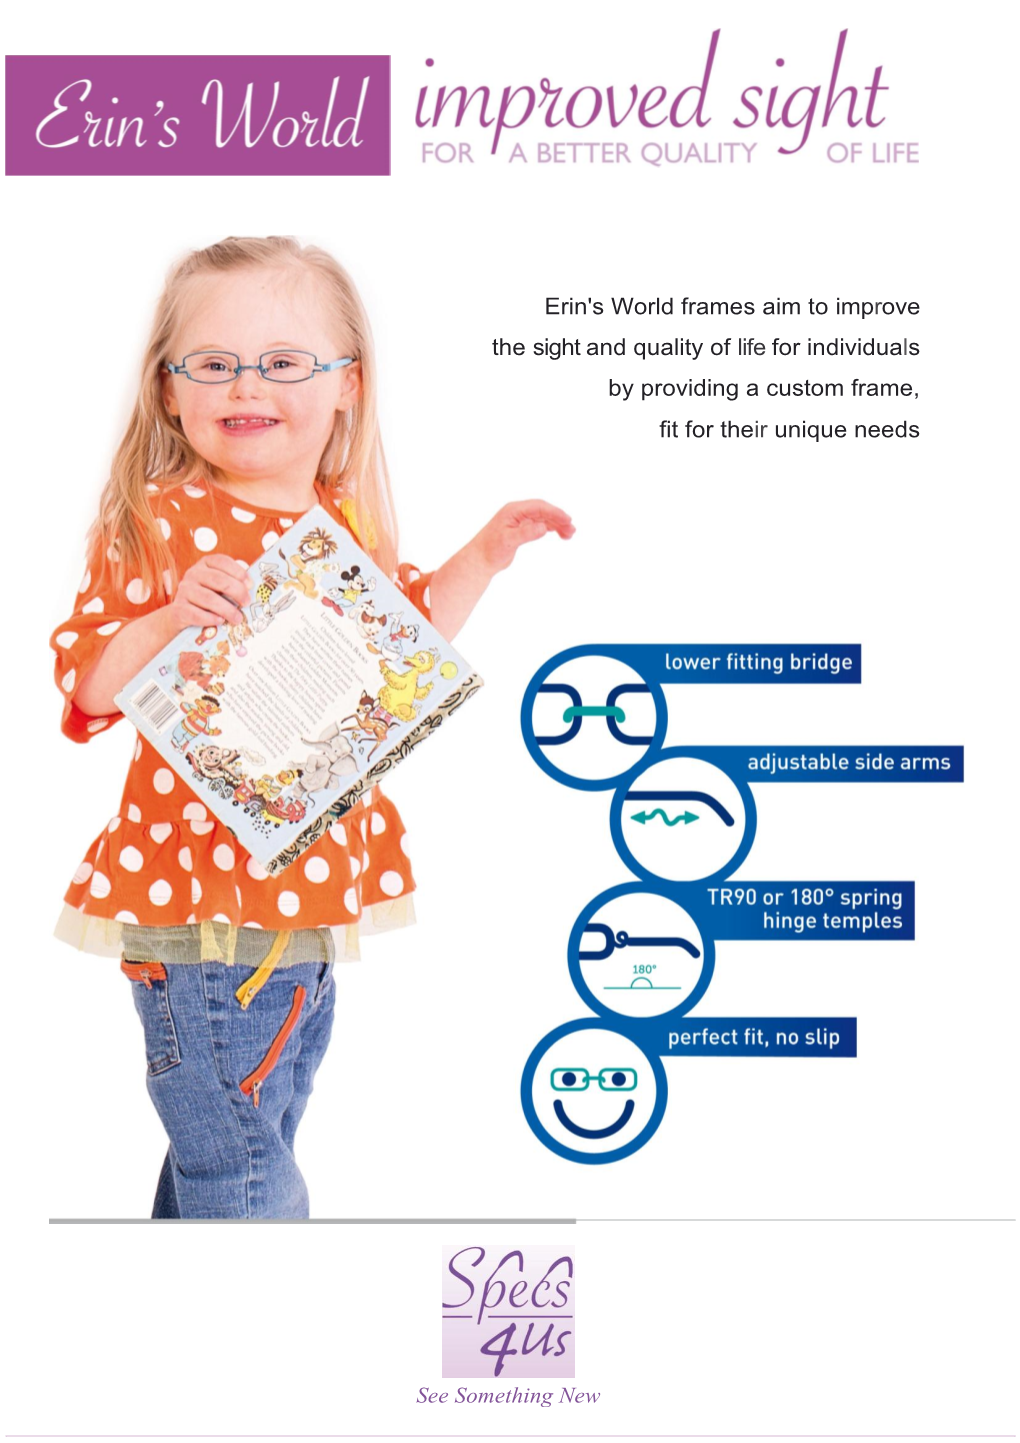 Erin's World Frames Aim to Improve the Sight and Quality of Life for Individuals by Providing a Custom Frame, Fit for Their Unique Needs